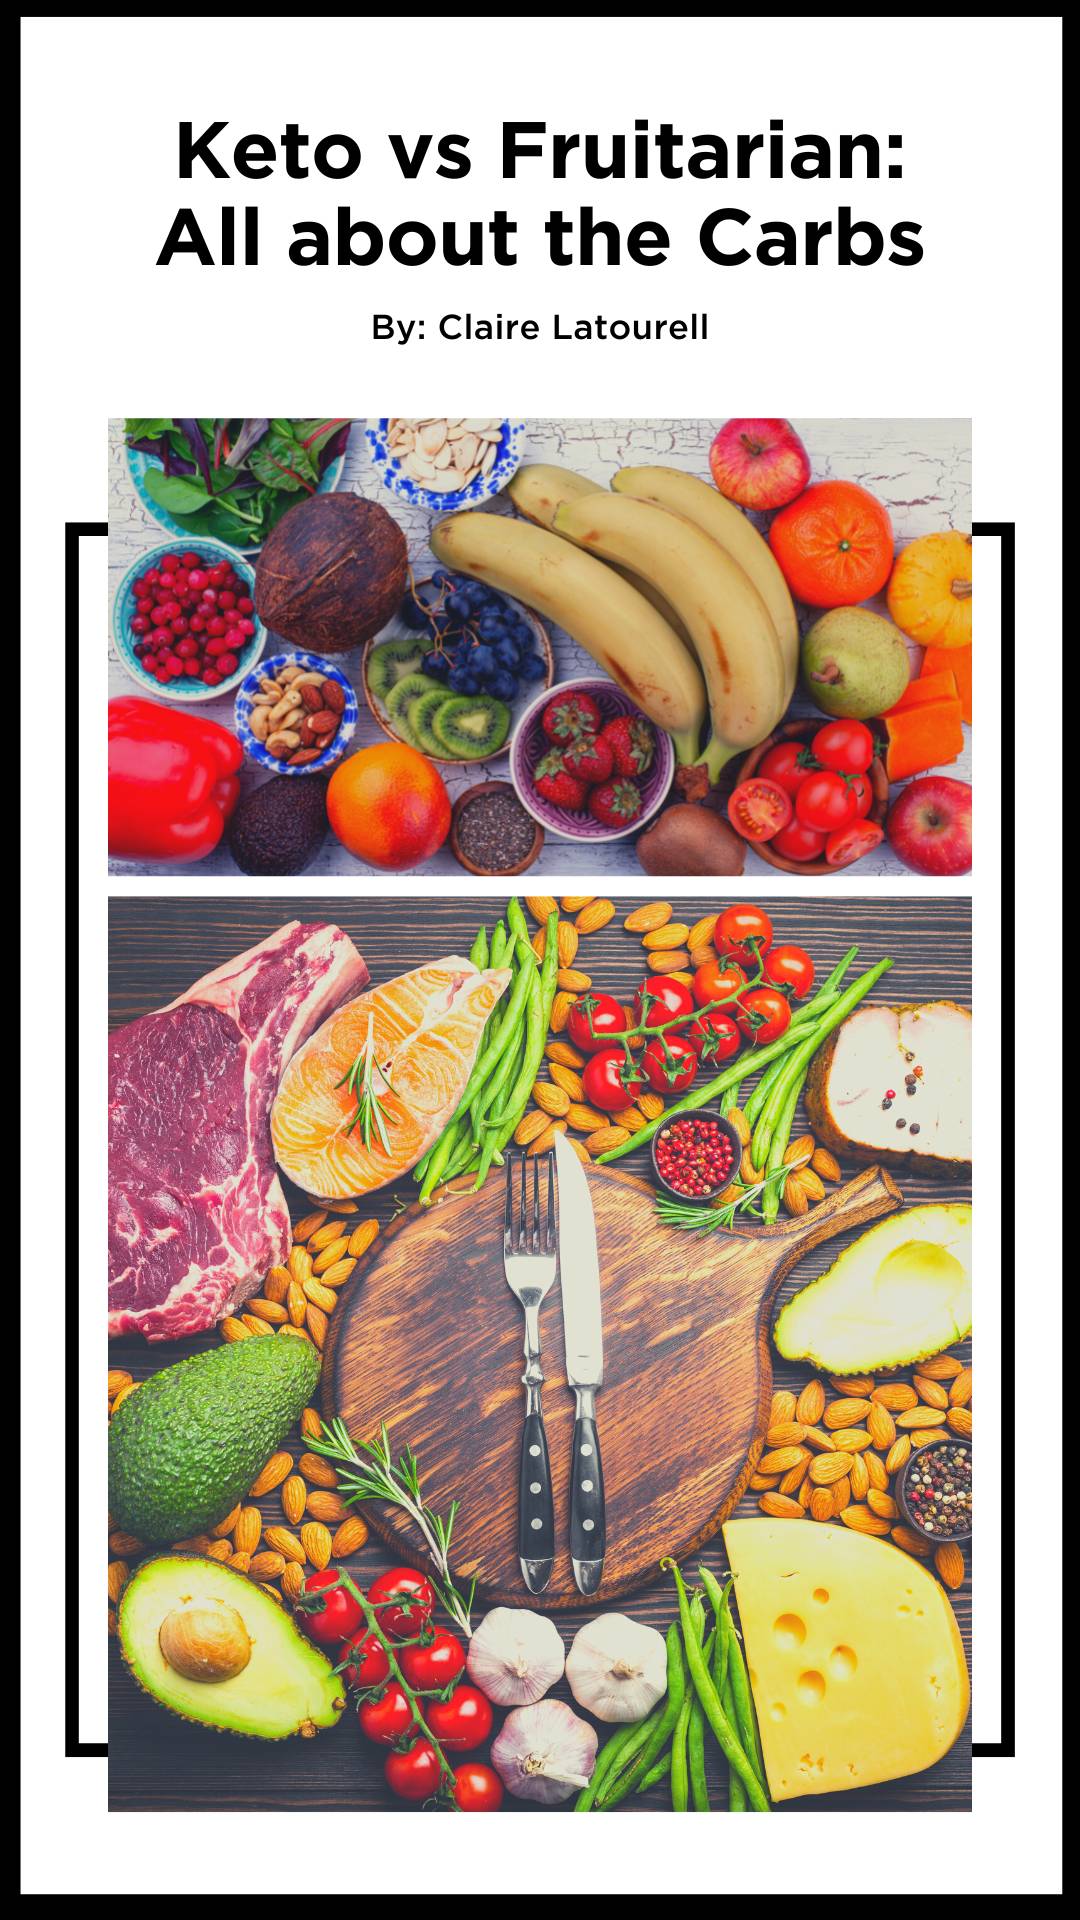 Image of fruits, veggies and meats and title that says "Keto vs Fruitarian: All about the carbs"